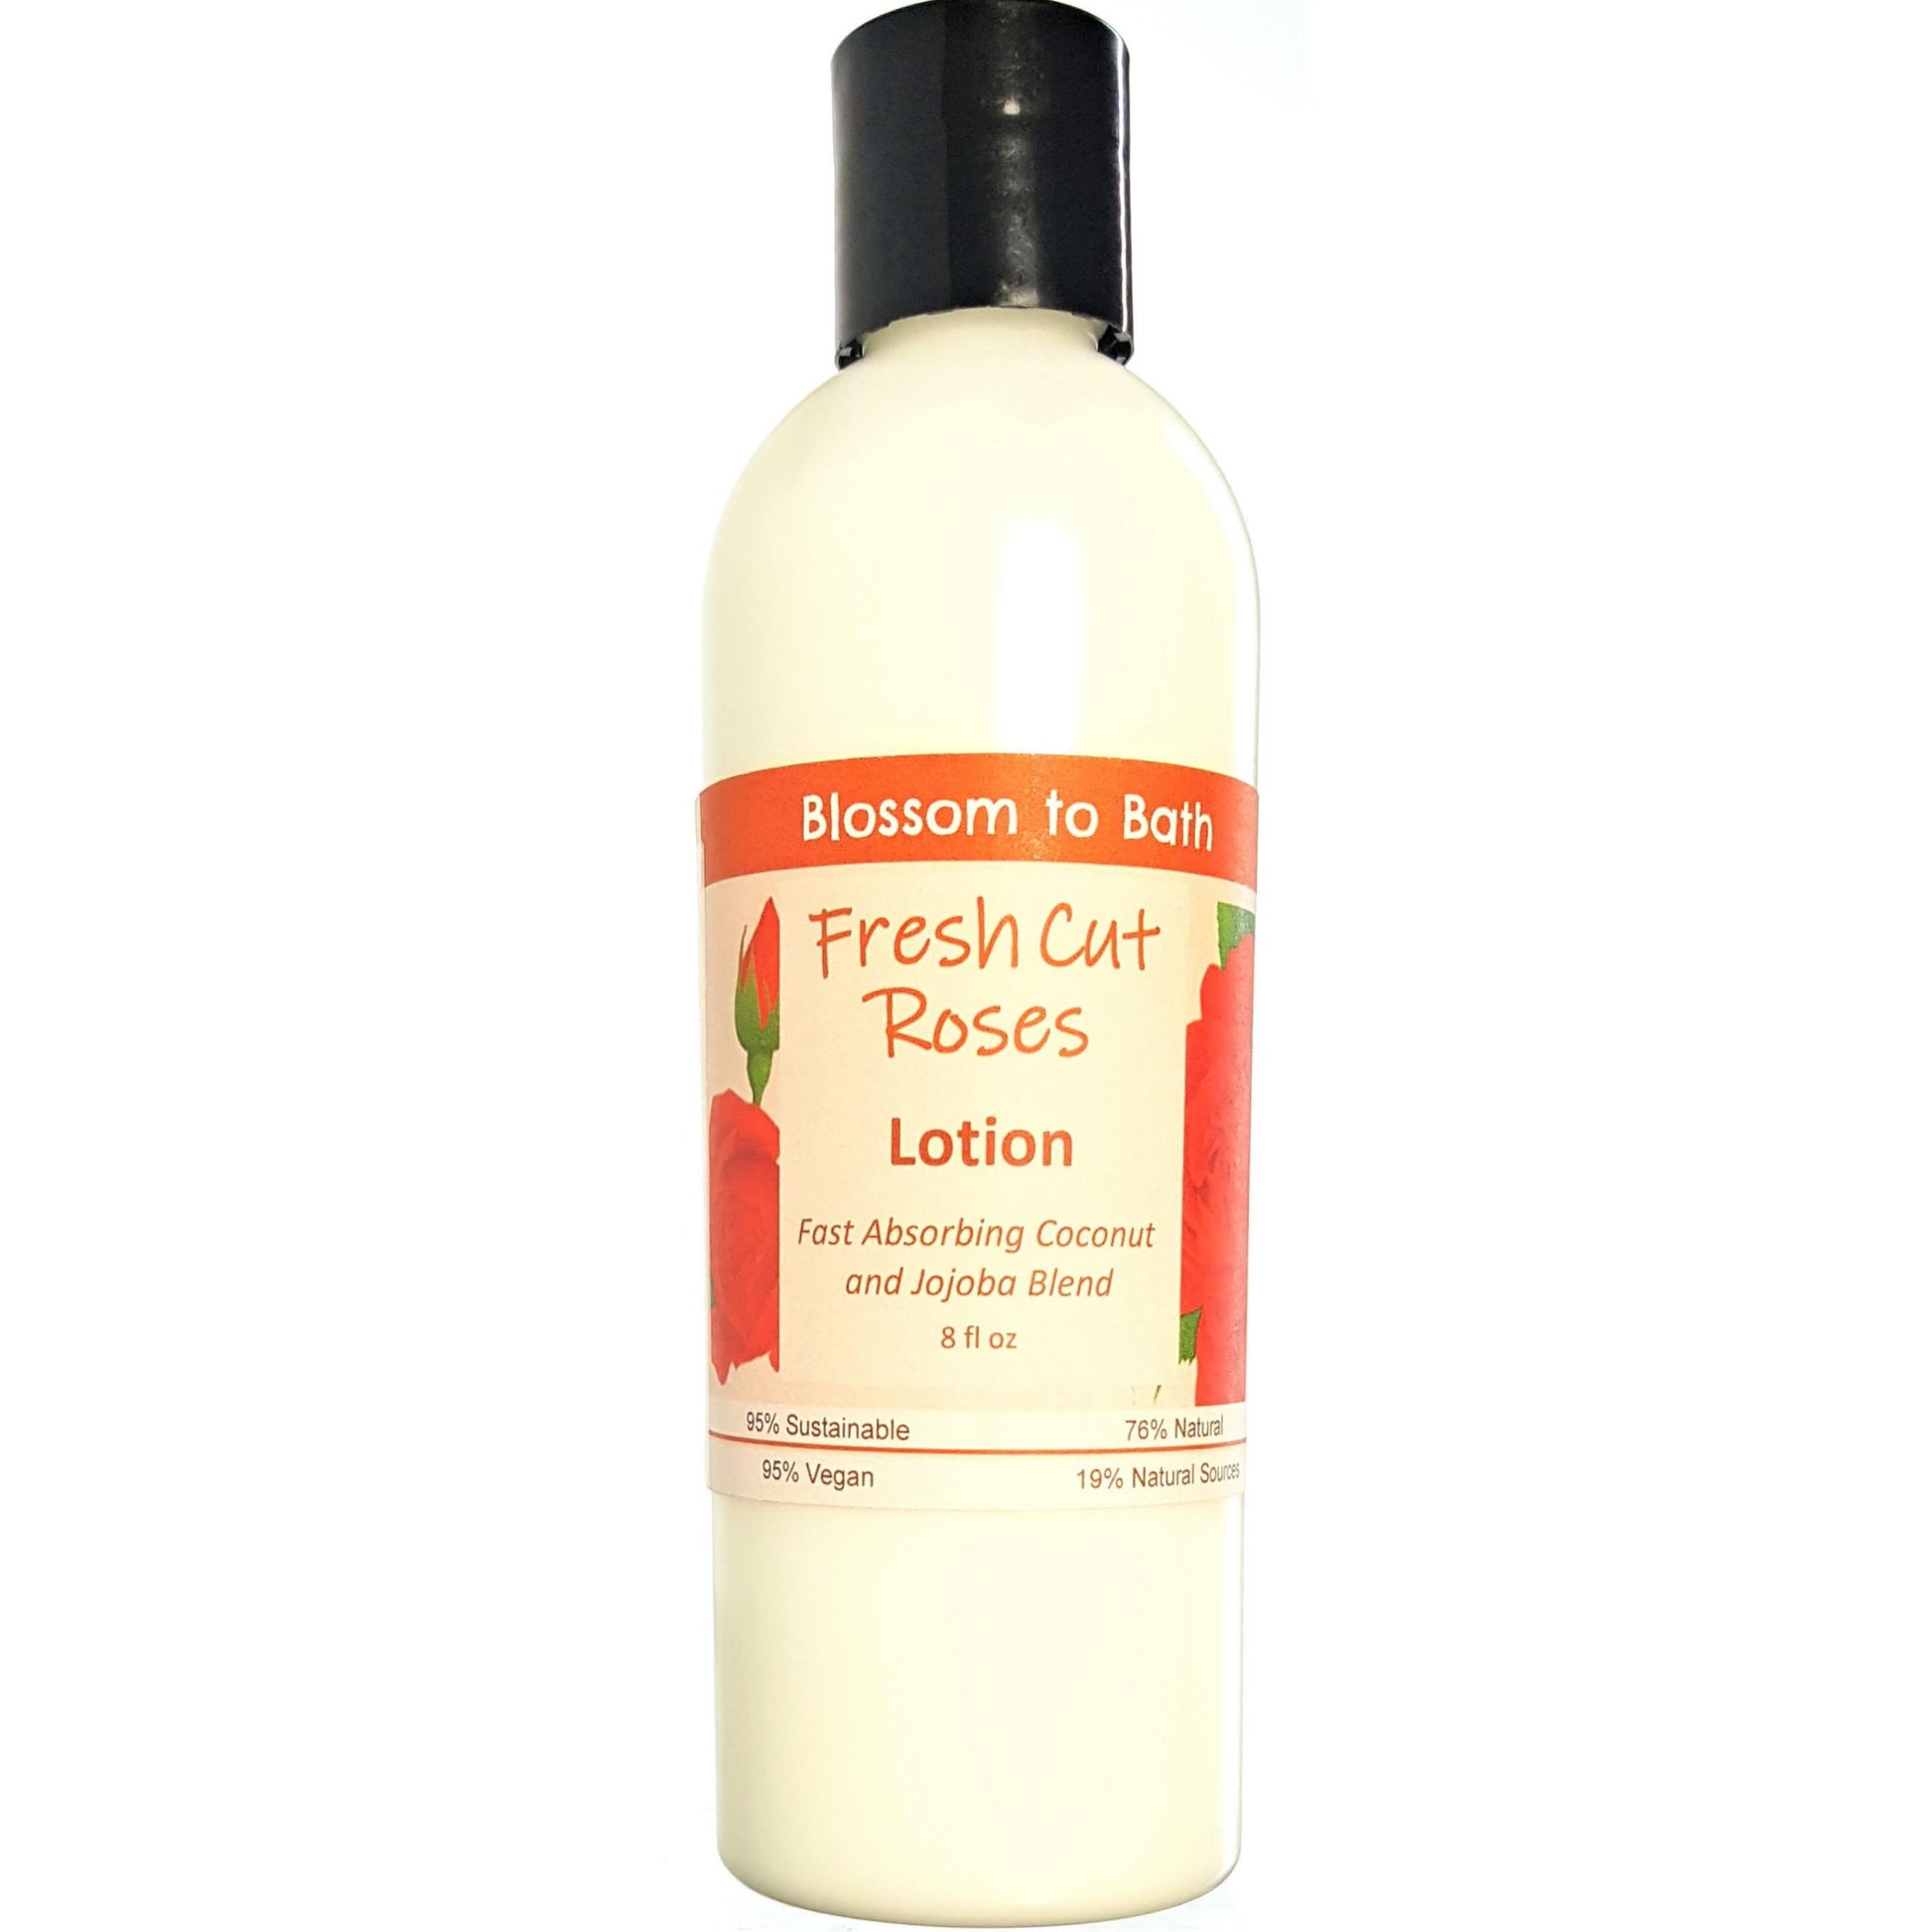 Buy Blossom to Bath Fresh Cut Roses Lotion from Flowersong Soap Studio.  Daily moisture  that soaks in quickly made with organic oils and butters that soften and smooth the skin  A true rose fragrance, the scent captures the splendor of a newly blossomed rose.